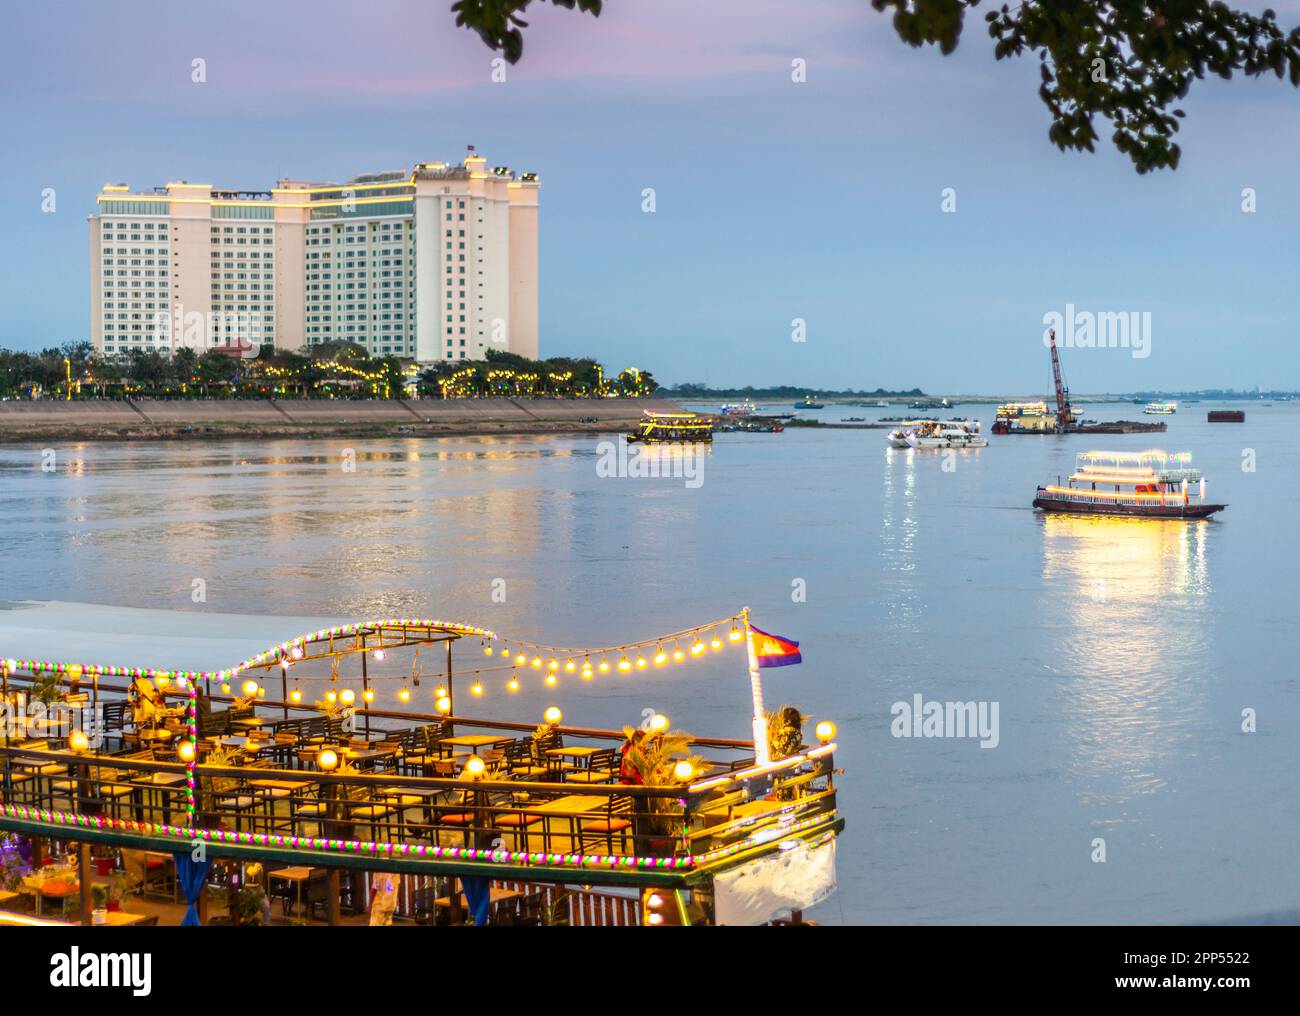 Illuminated with vibrant,strip lights to attract tourists,the river craft,big and small,take trips up and down the Tonle Sap and Mekong rivers,visitin Stock Photo